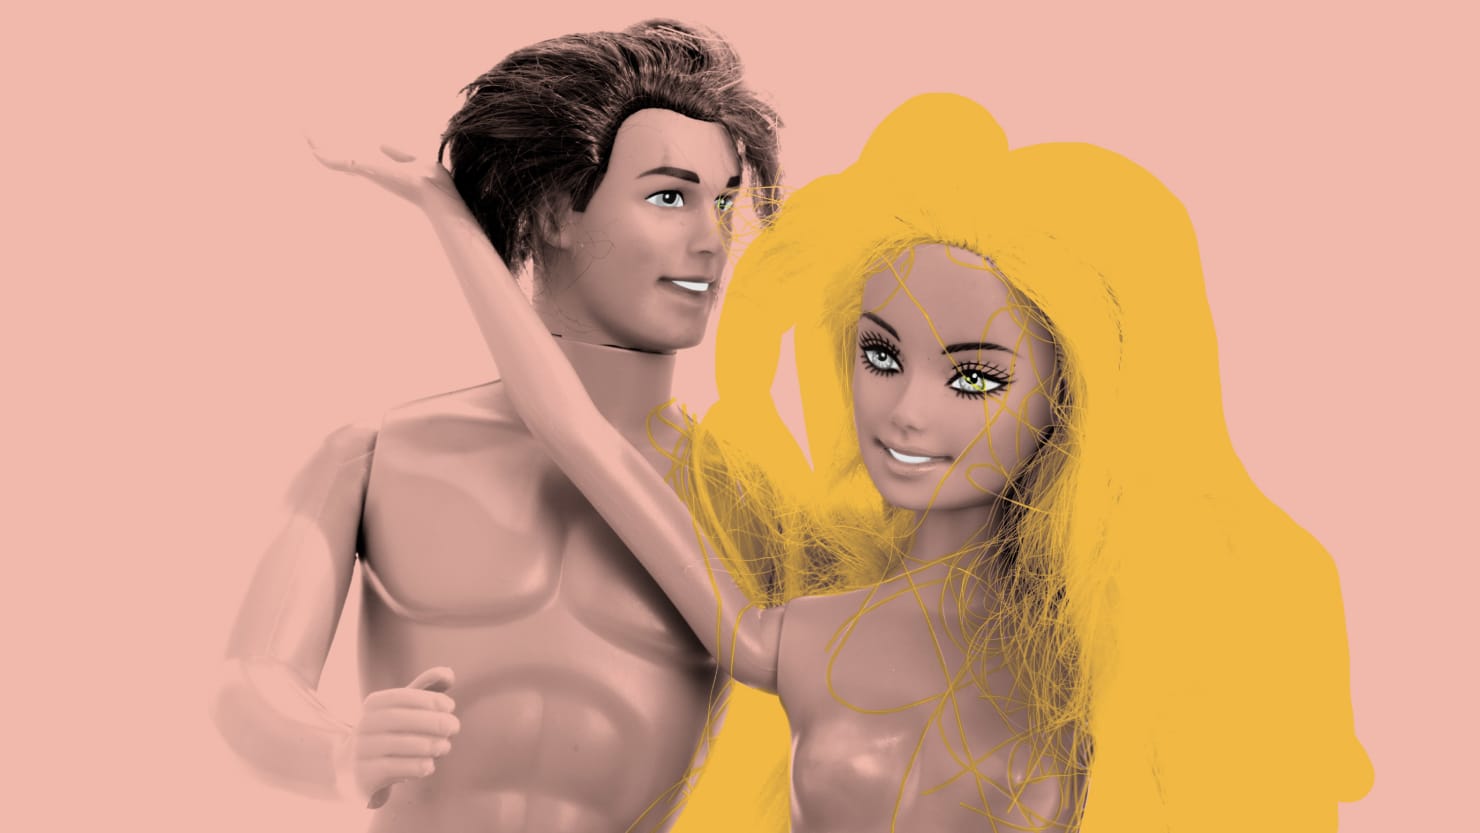 Is there nudity in the barbie movie